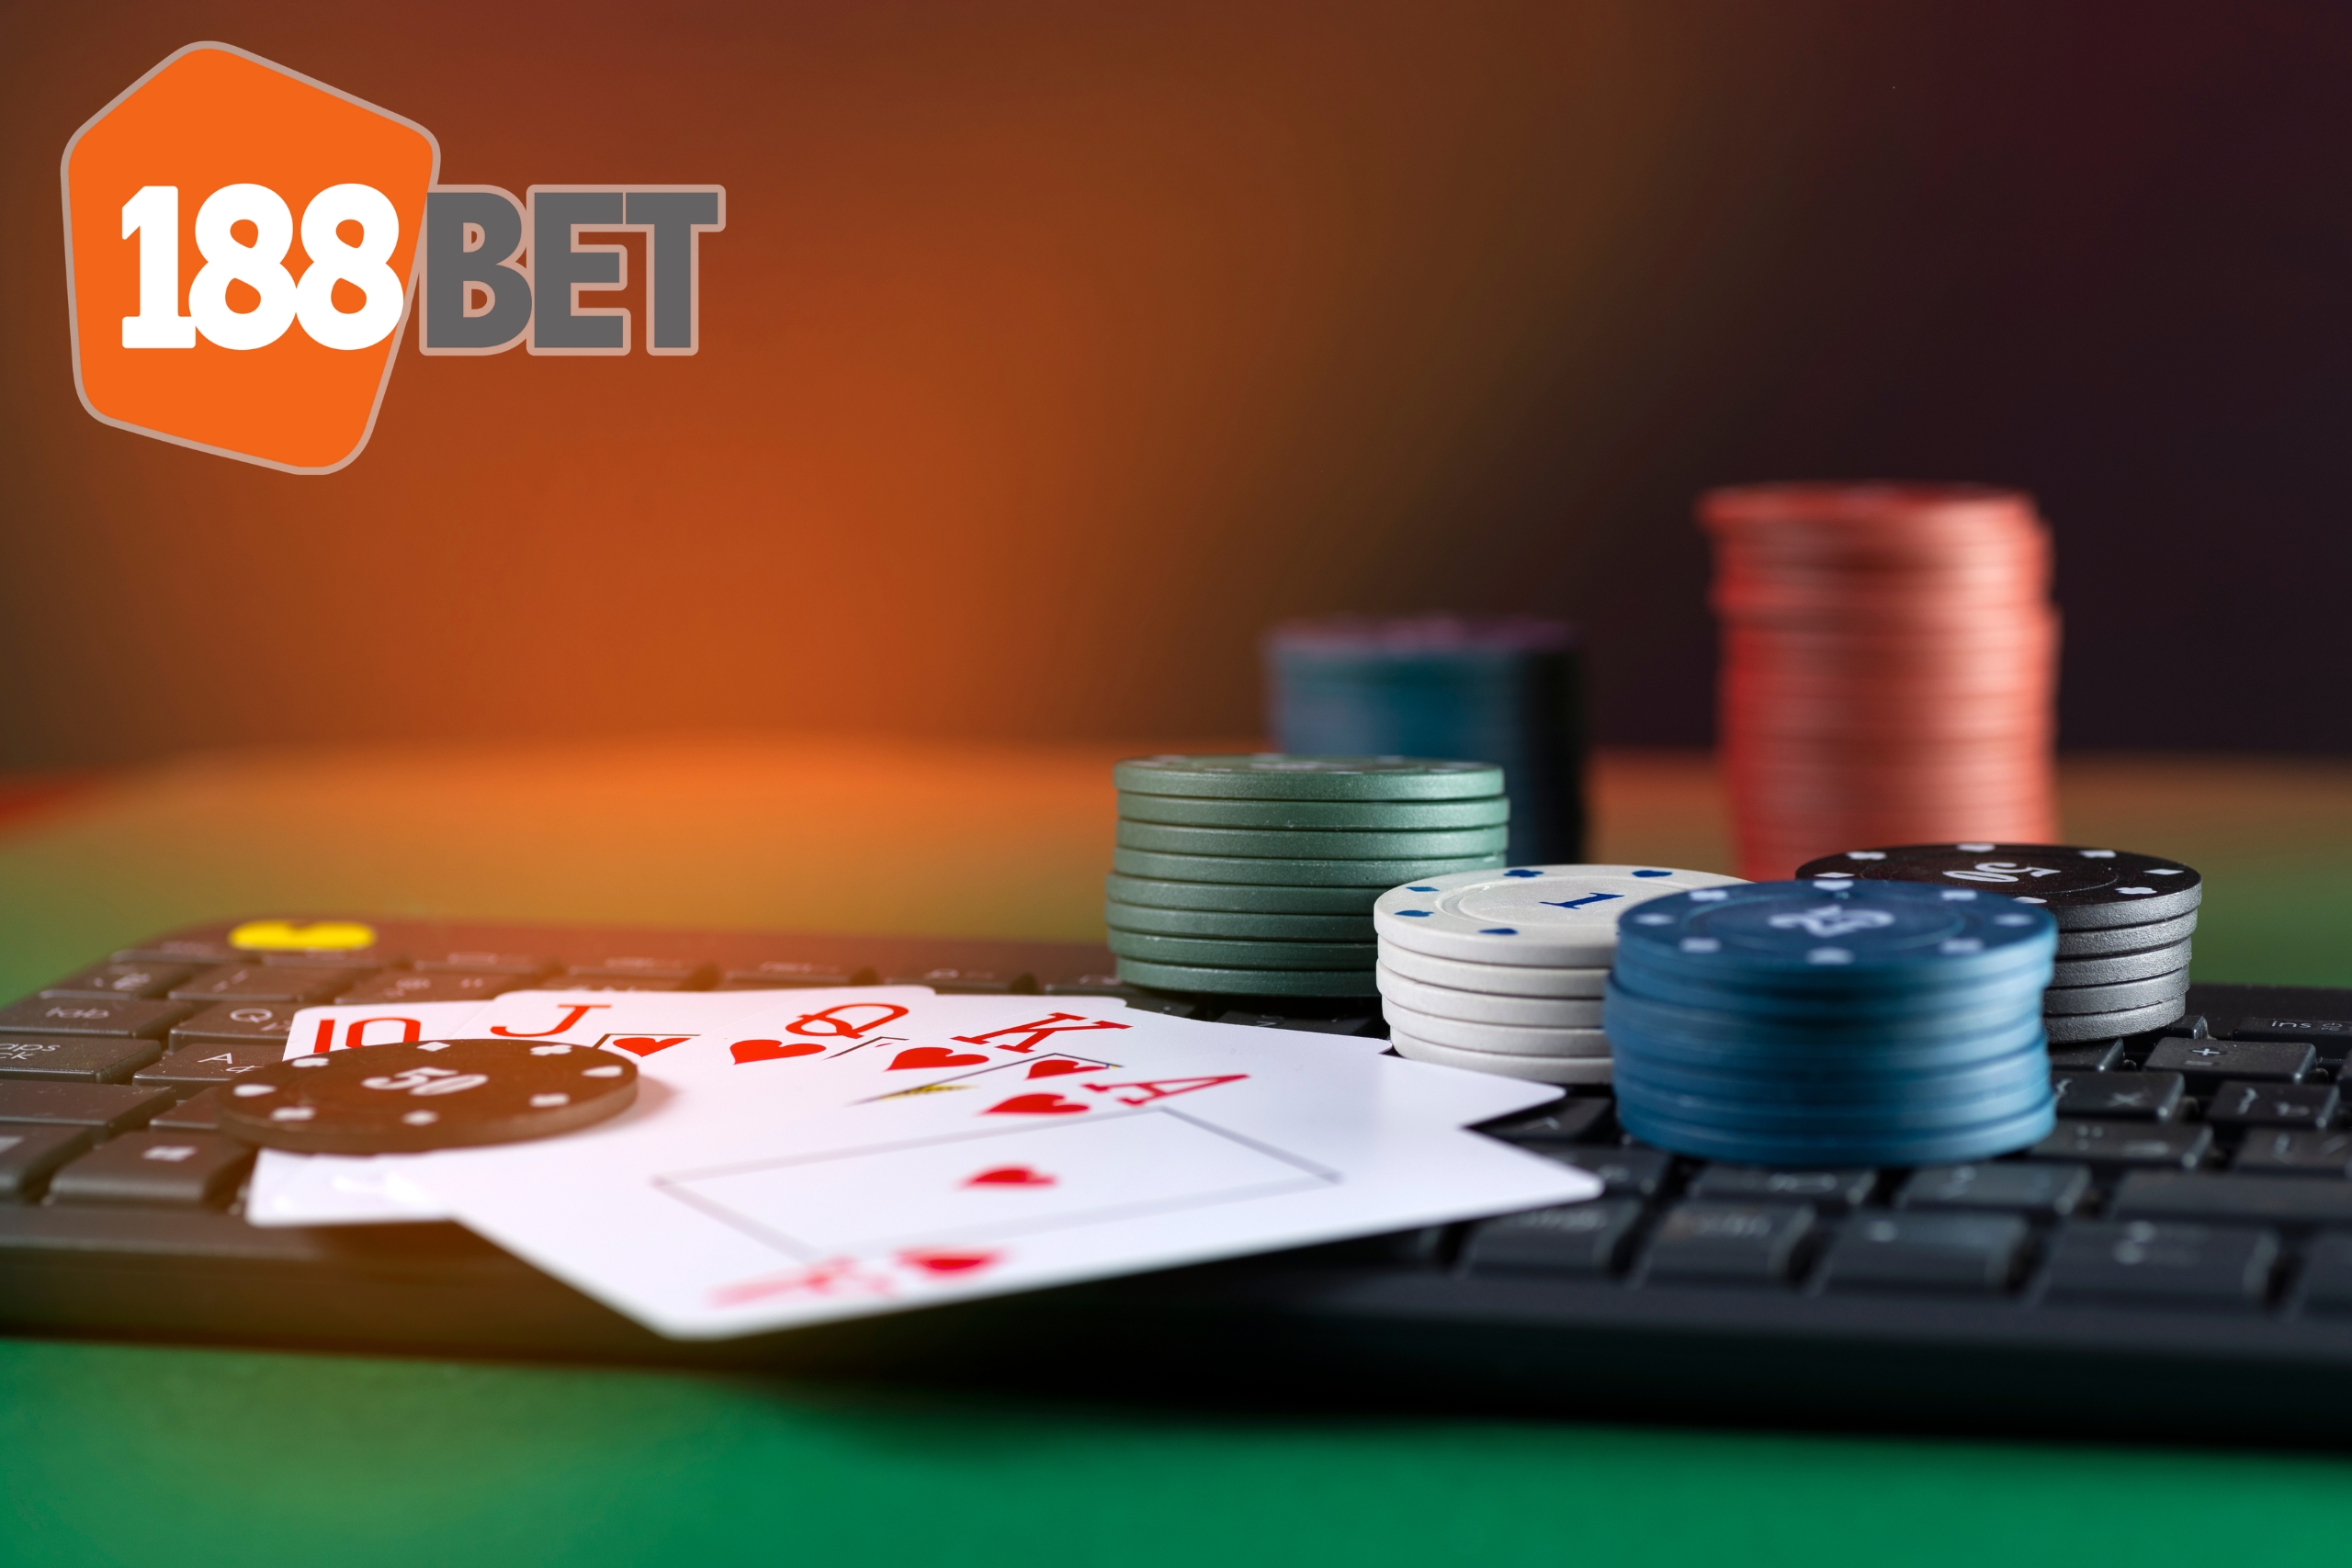 PG Slots: Direct Website For High Stakes And Huge Payouts